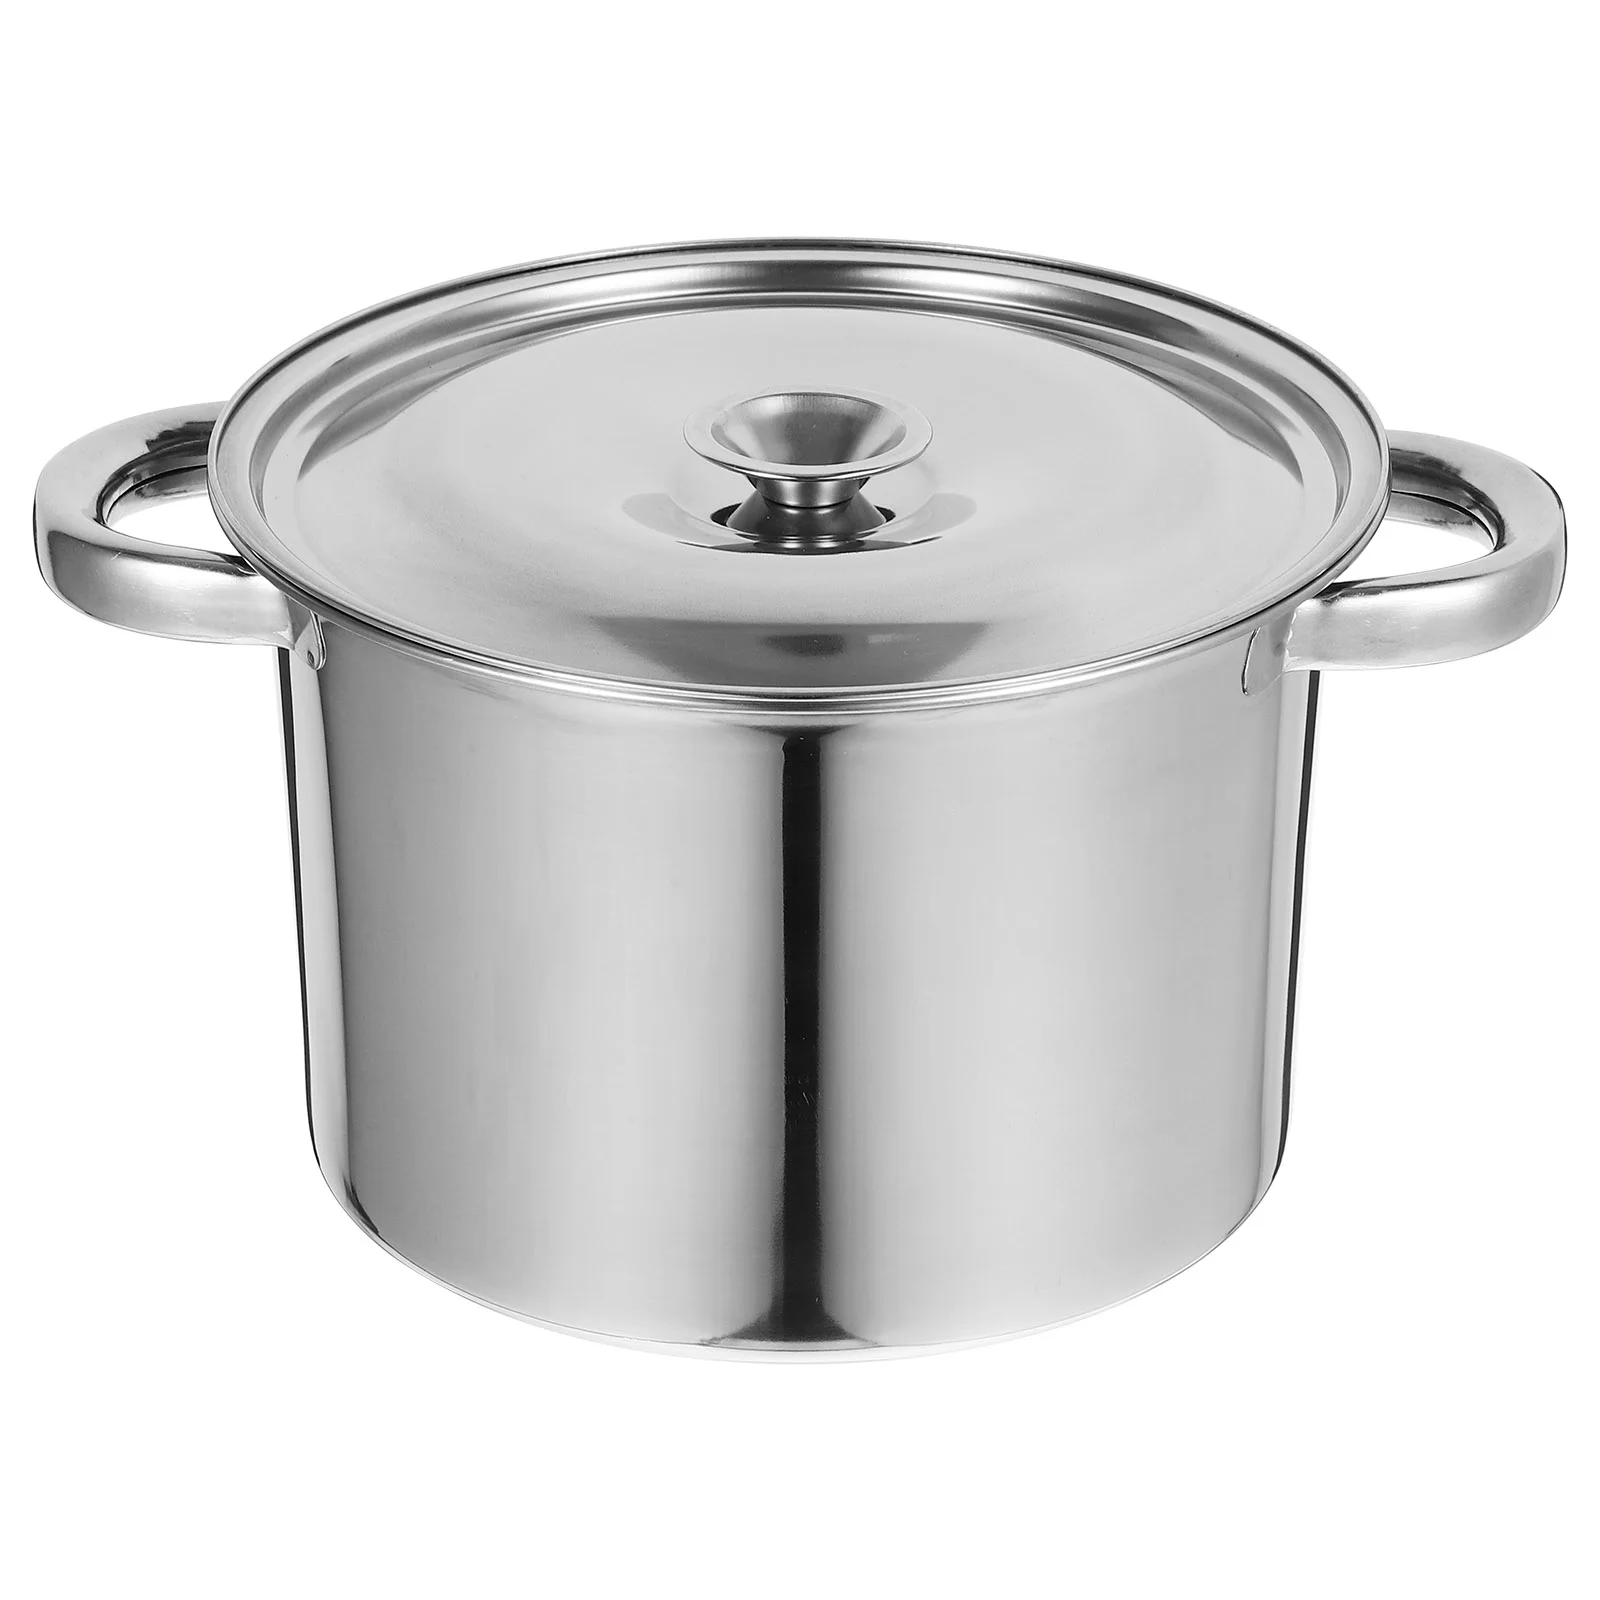 

Covered Stockpot Steaming Multipurpose Cooking Stainless Steel Cookware Commercial Thicken Boiling Household Utensils